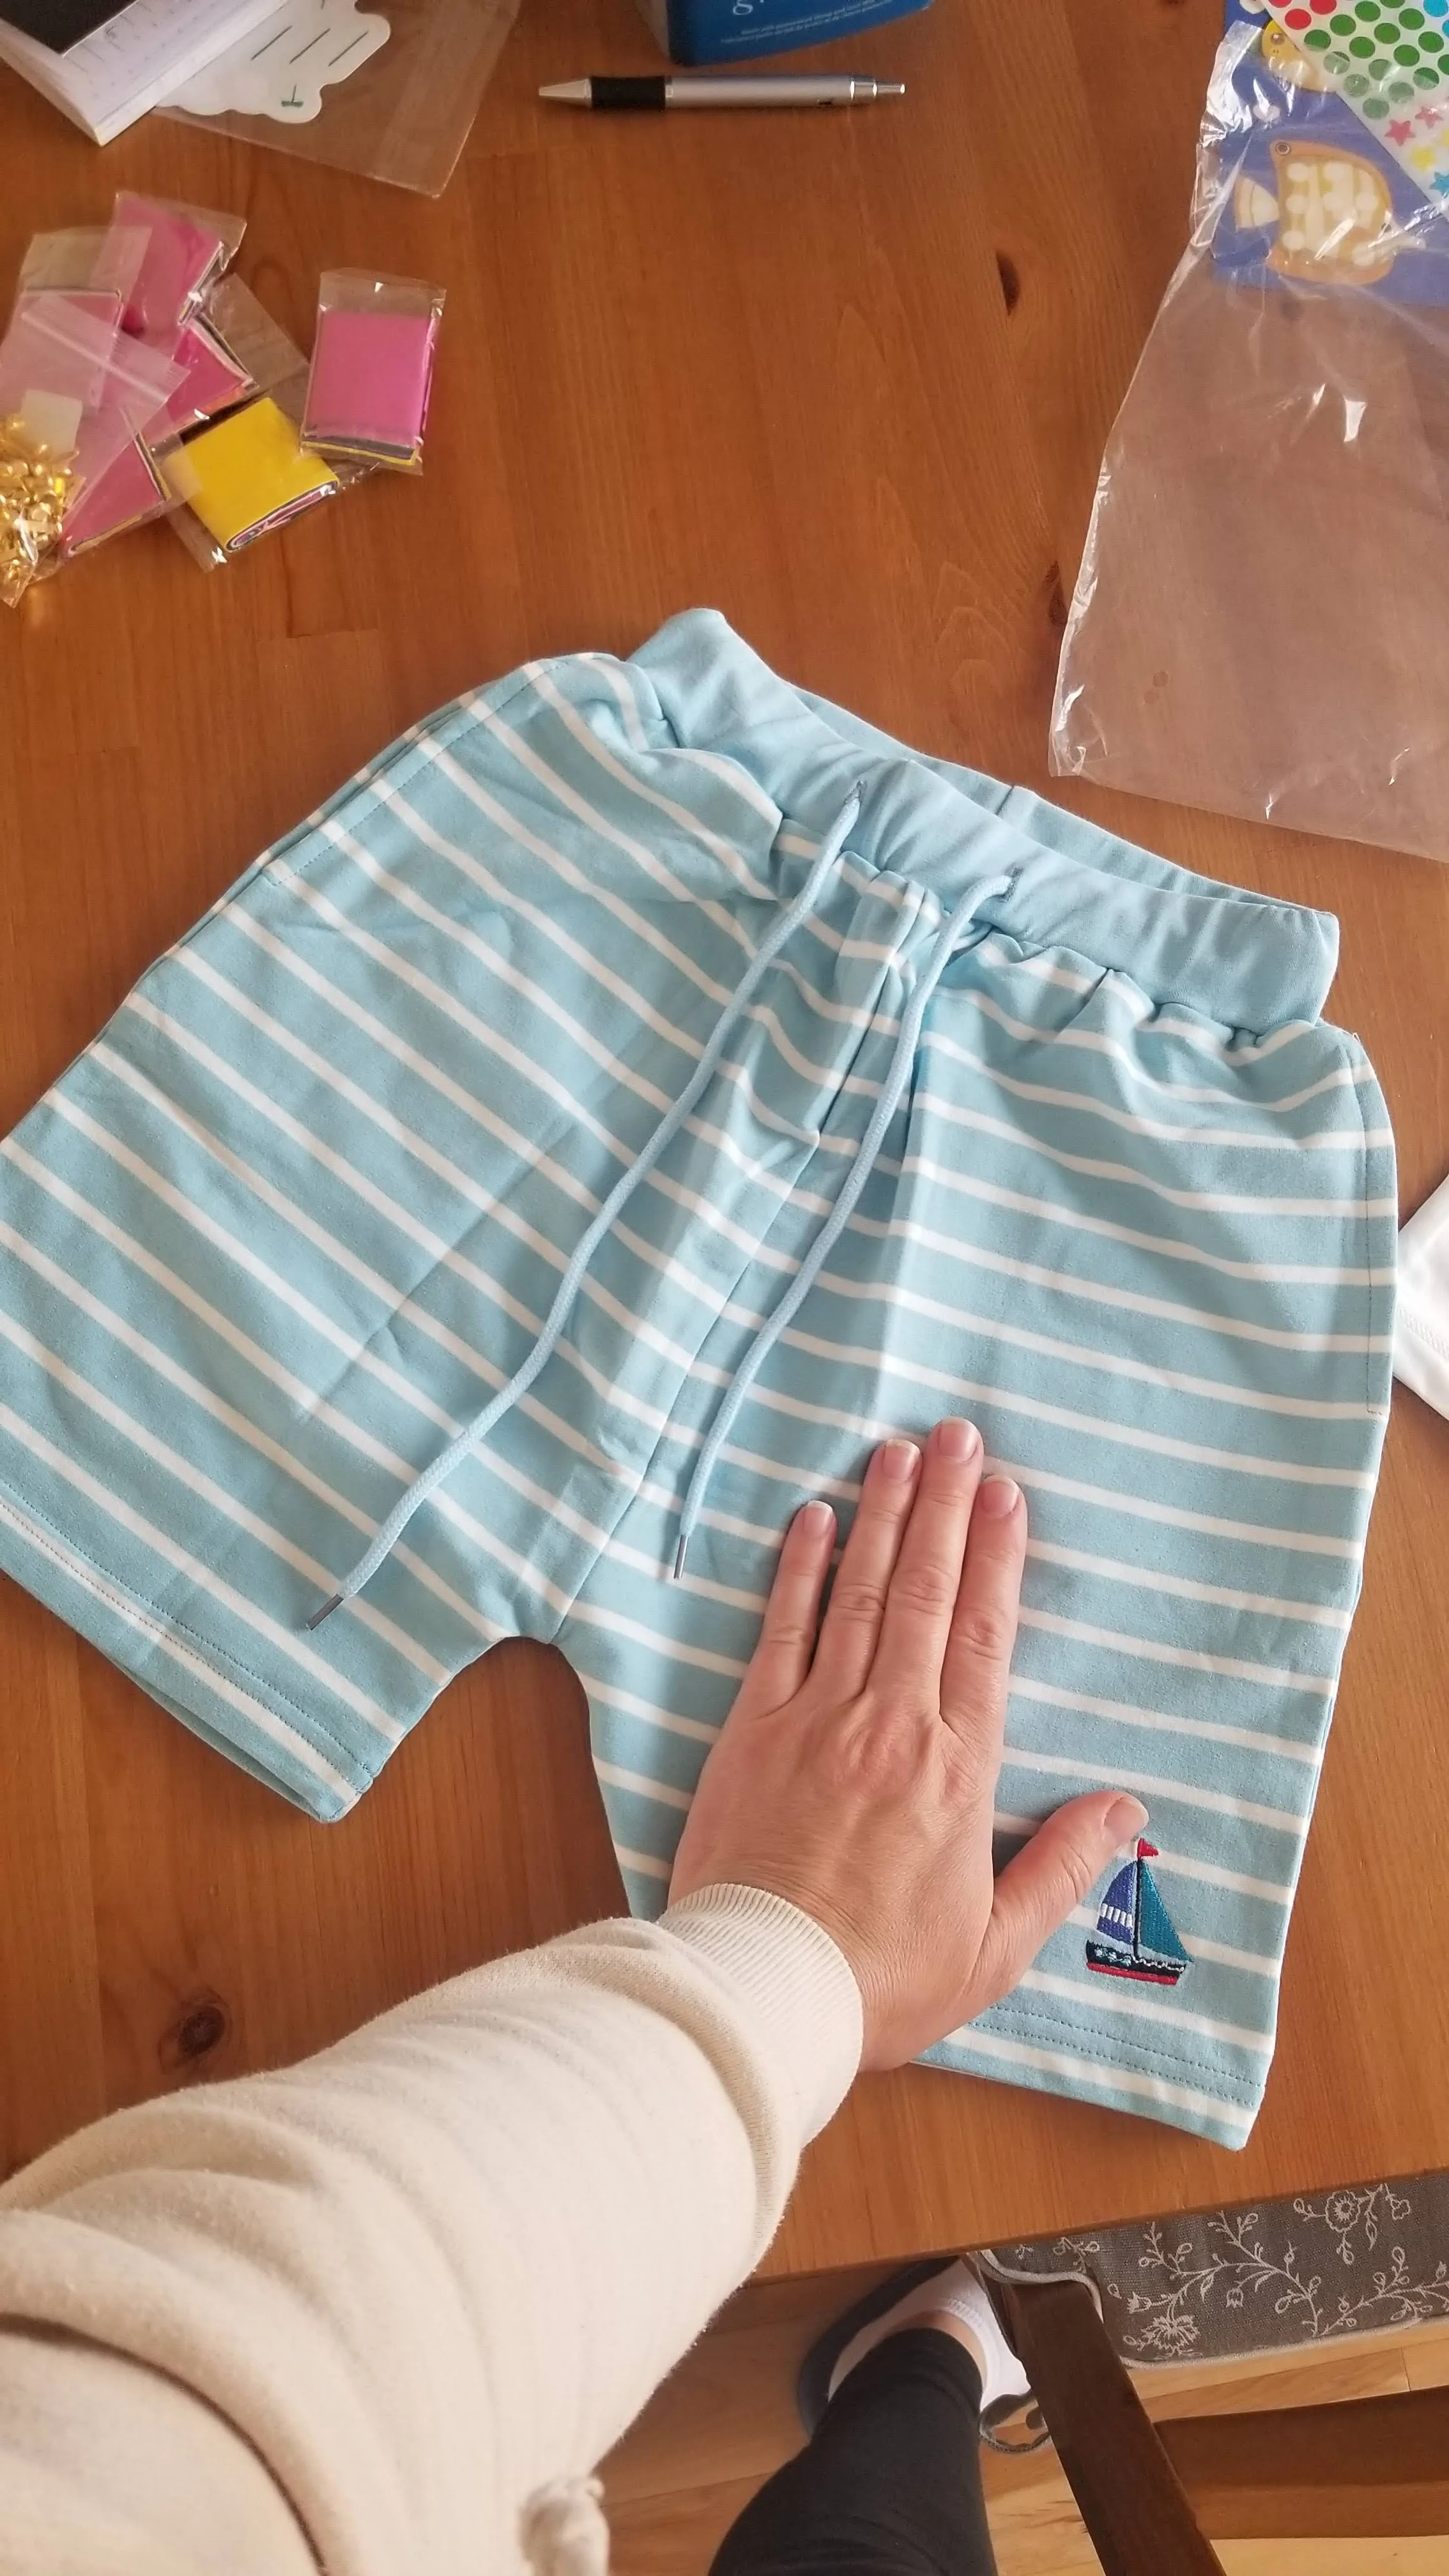 Boys White Boat Sailing Print T-shirt and Striped Shorts Clothing Set – 2-7 Years photo review